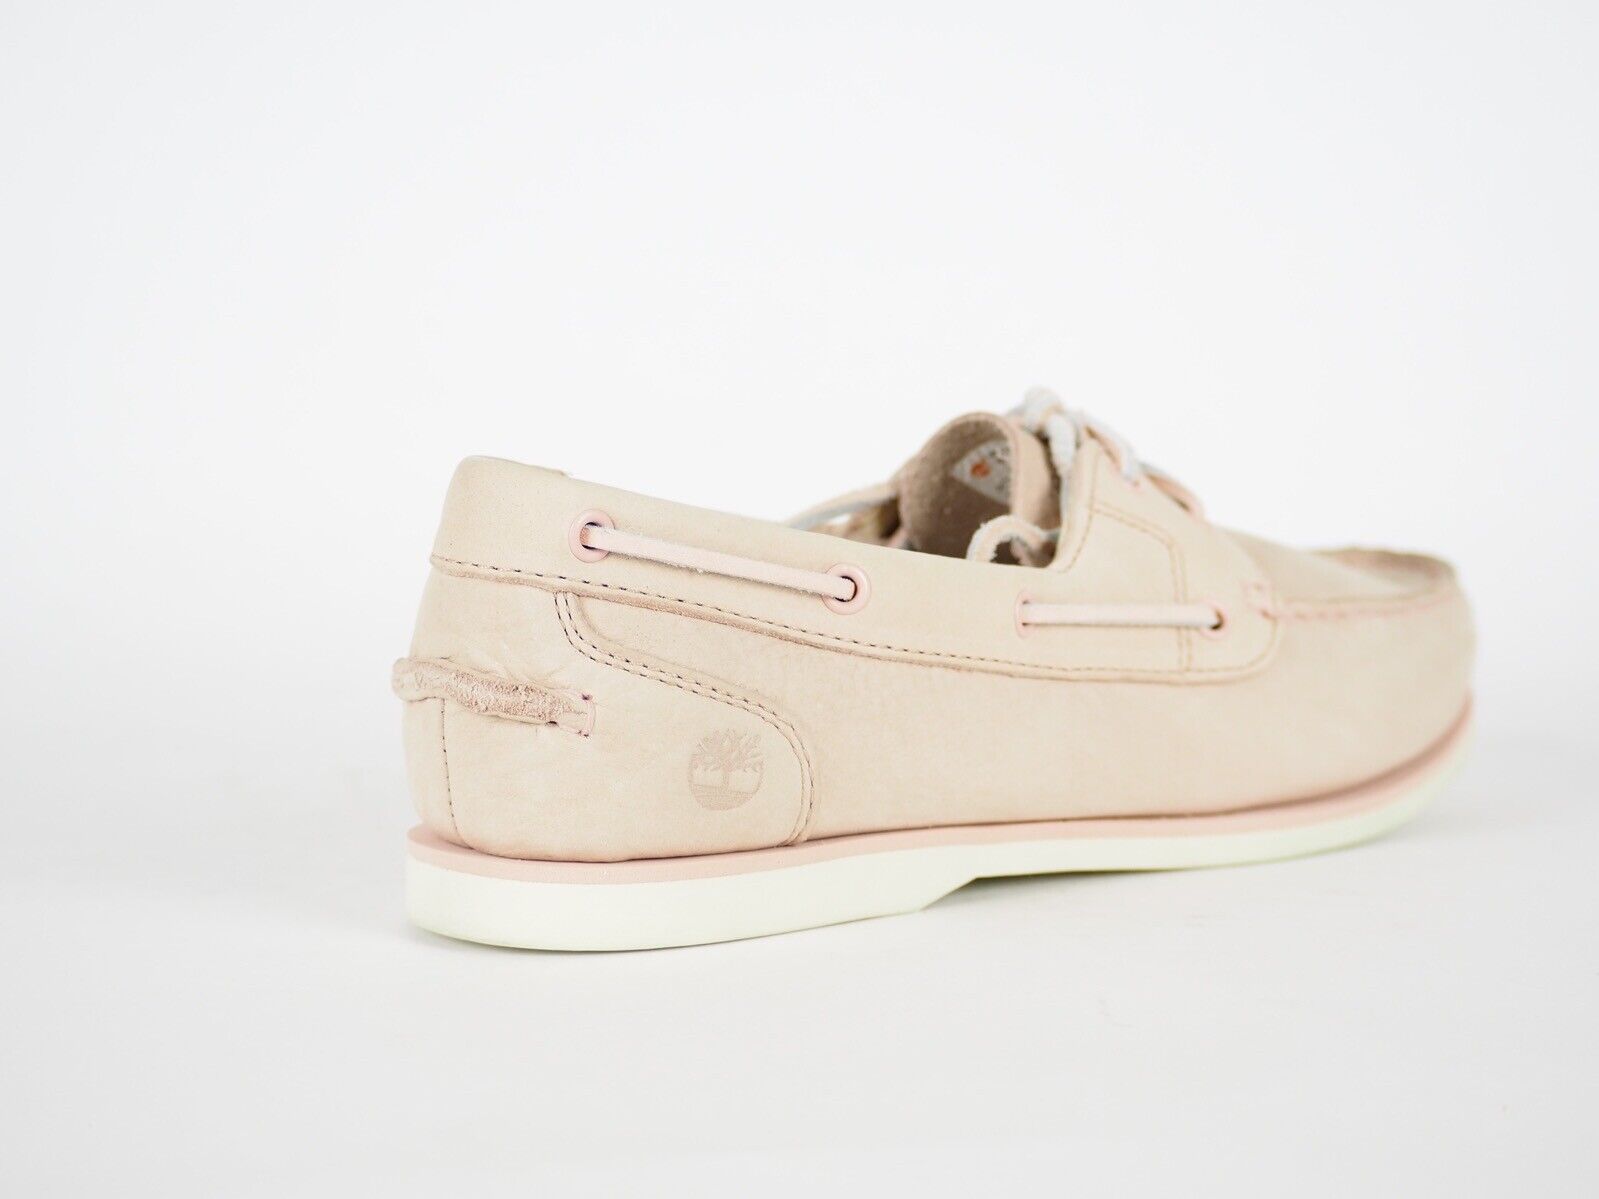 Womens Timberland Classic 2 Eye A1JJD Pale Pink Leather Slip On Boat Shoes - London Top Style